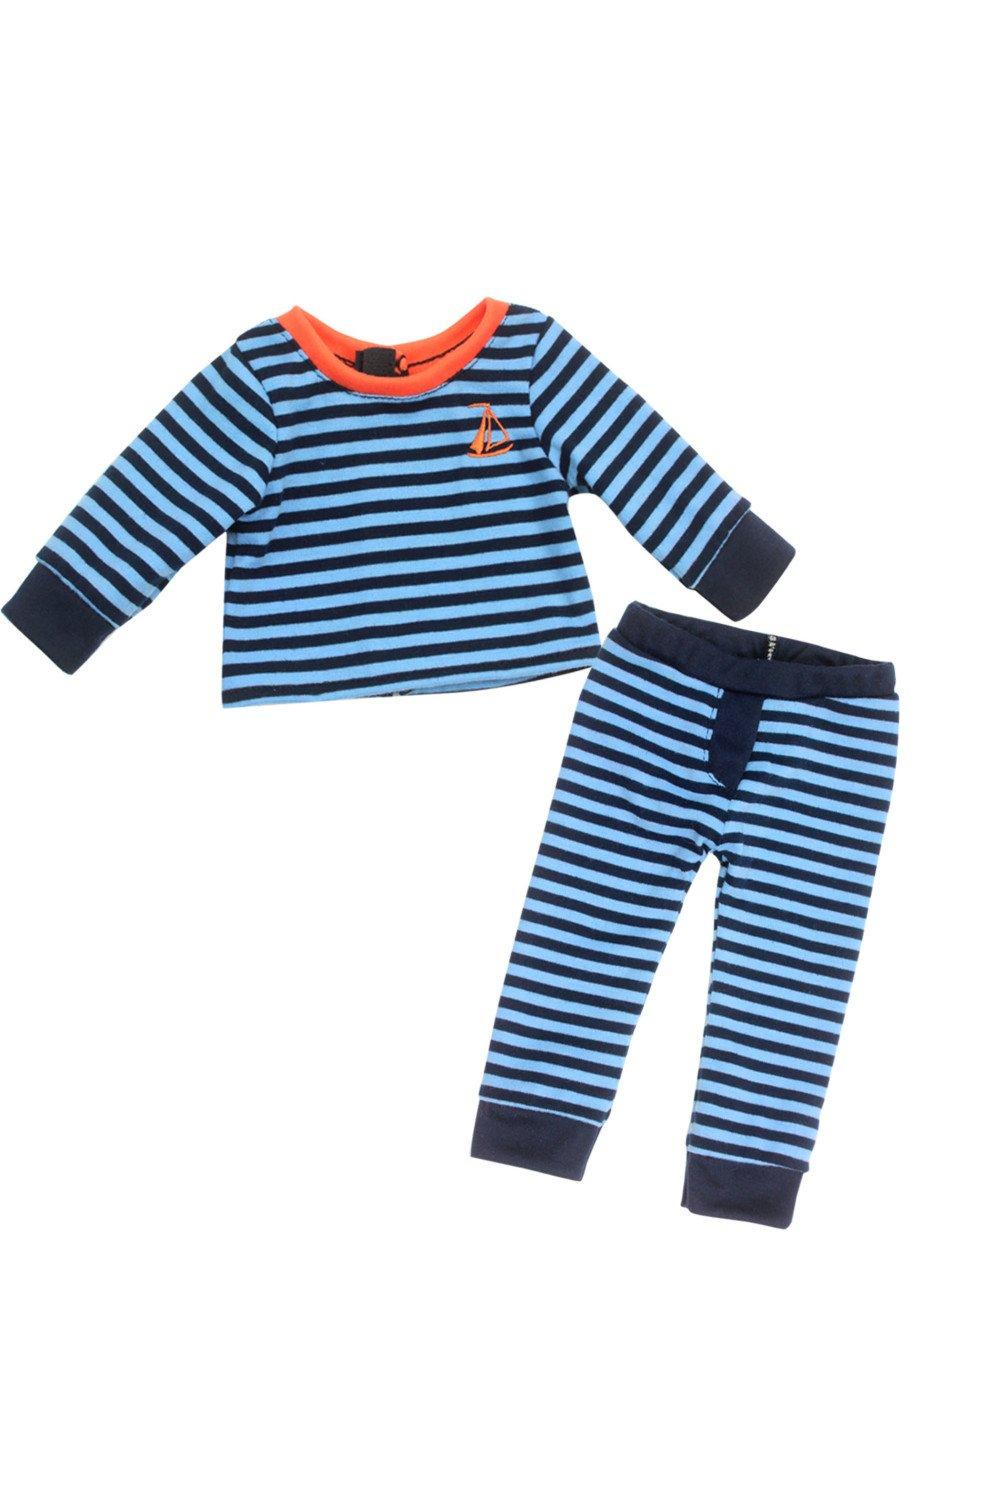 Sophia’s  2 Piece 18" Baby Boy Doll Pijama Outfit, Doll Clothes